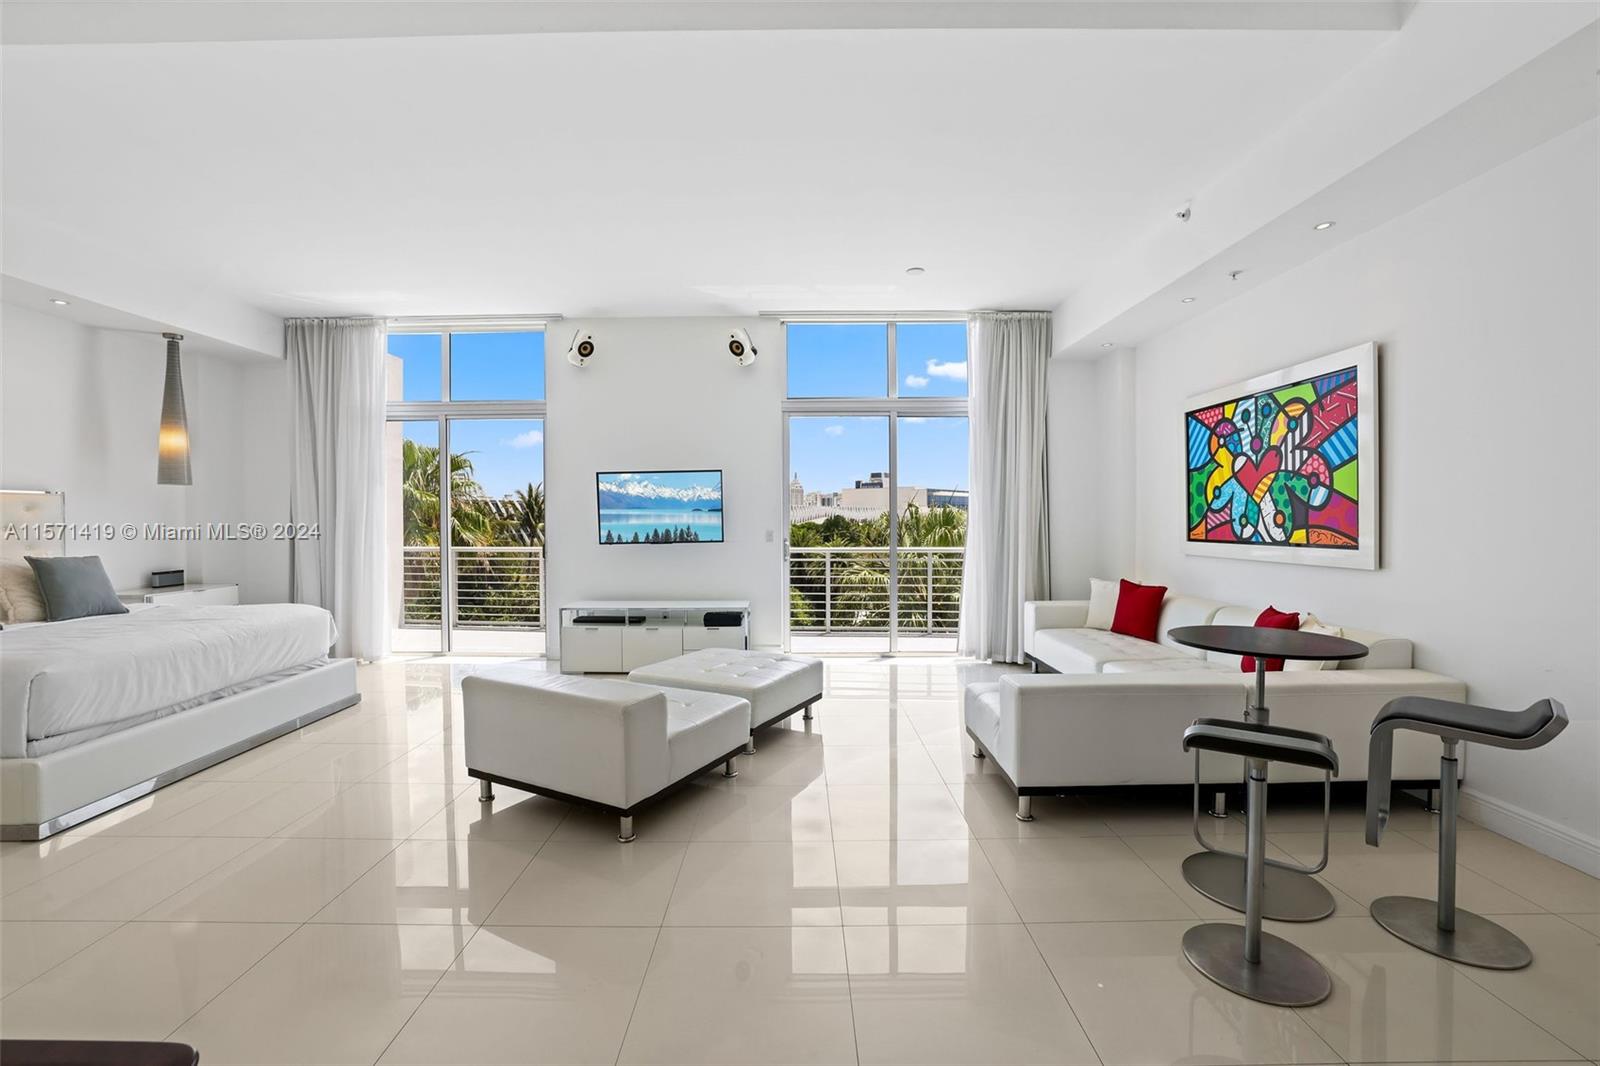 Welcome to this unique loft-style 1 bed/1.5 bath residences located at The Meridian Condo in South Beach. Walk into the unit and enjoy the spacious open floor plan that provides lots of natural light & has 11.5 foot ceilings throughout. Expansive terrace with views of Miami Beach Botanical Gardens and the city skyline. Assigned parking space in the building garage as well as having the convenience of a washer-dryer in unit. Located centrally just steps from Miami Beach Golf Course, Miami Beach Convention Center, and the vibrant energy of Lincoln Road, the beach, and Sunset Harbour. Building amenities include a 24-hour doorman/security, rooftop pool & hot tub, and fully equipped gym.